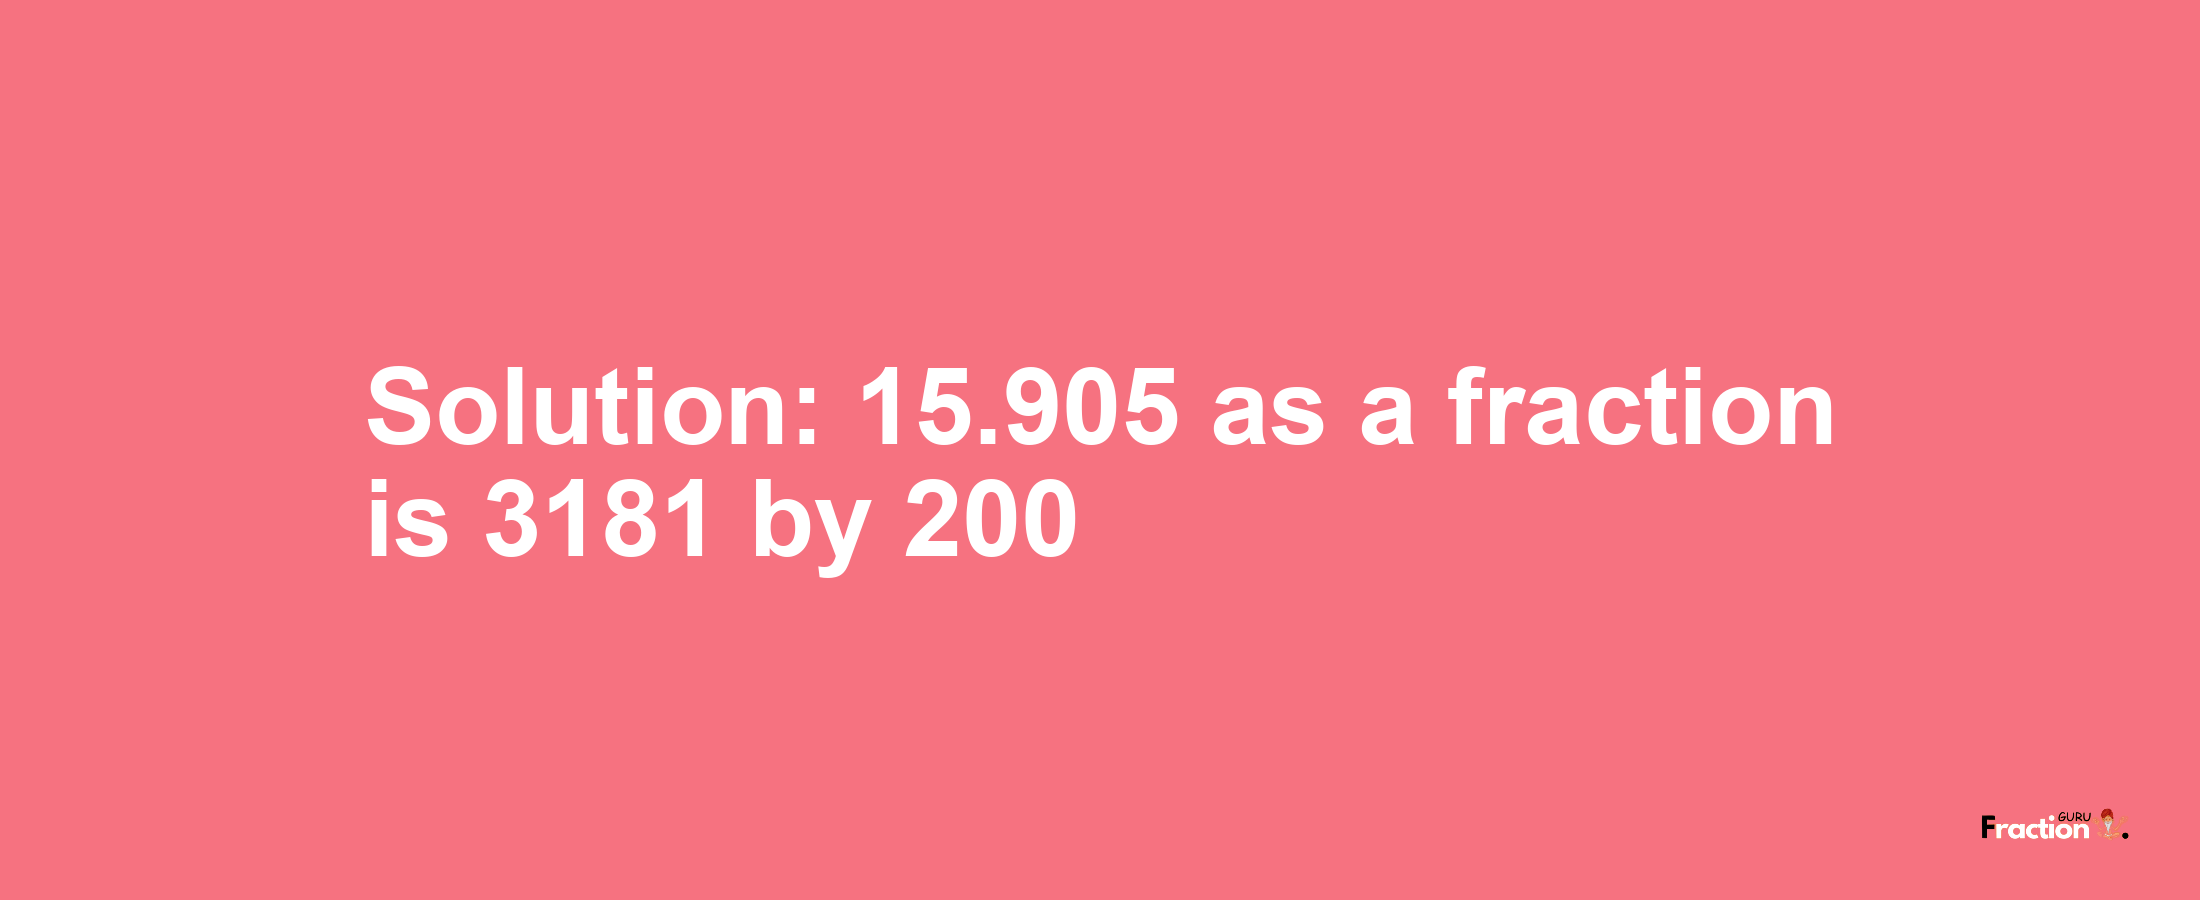 Solution:15.905 as a fraction is 3181/200